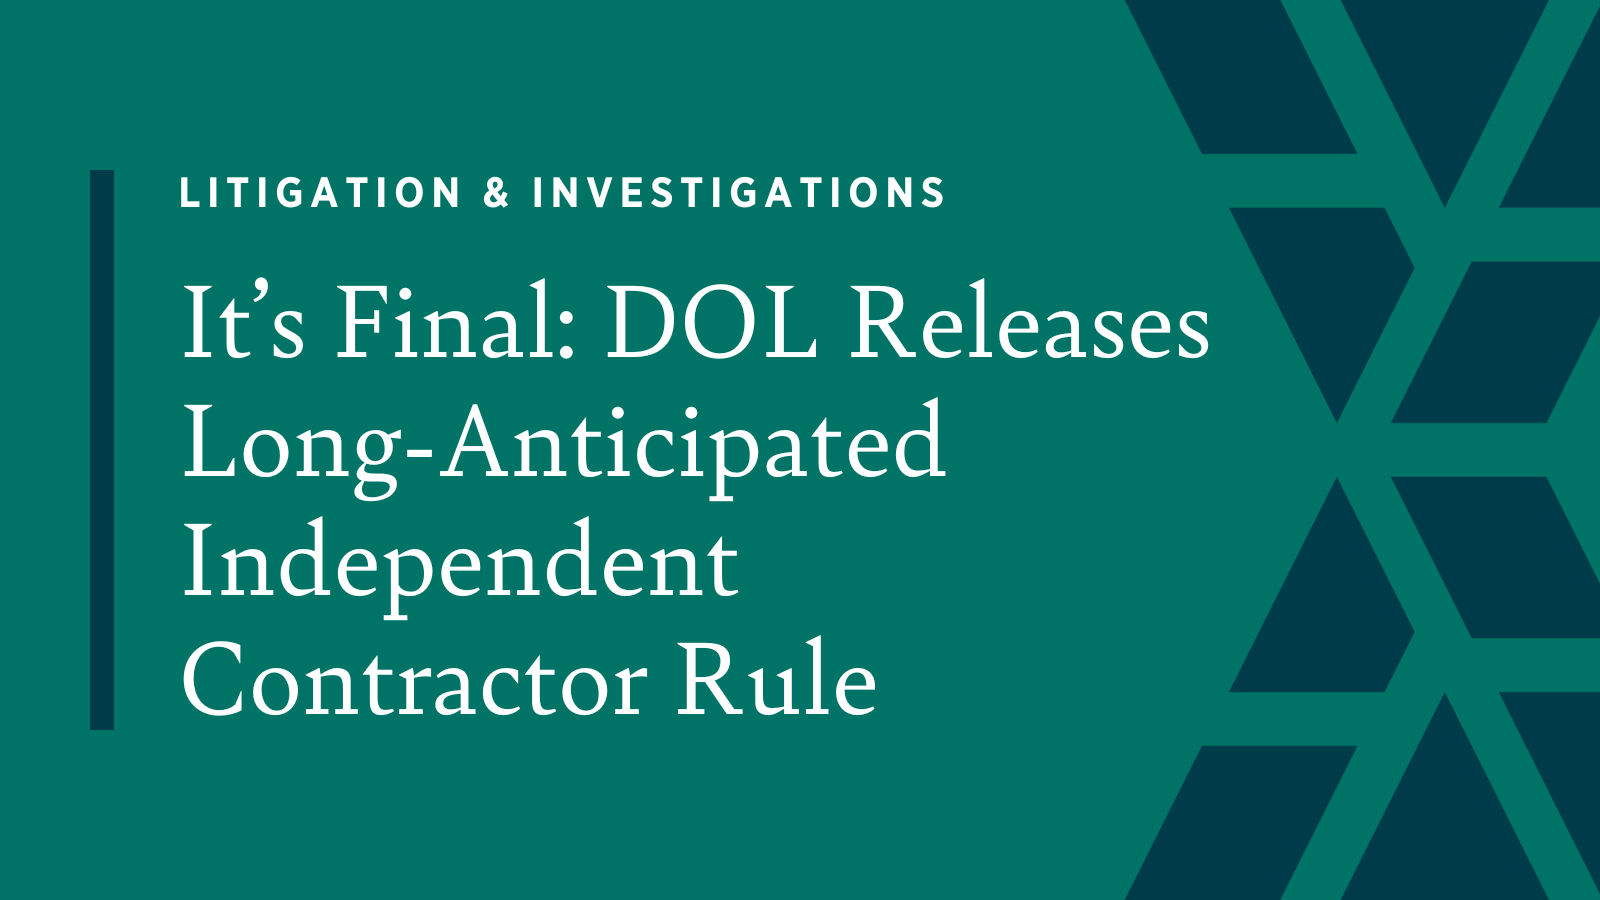 It’s Final DOL Releases LongAnticipated Independent Contractor Rule